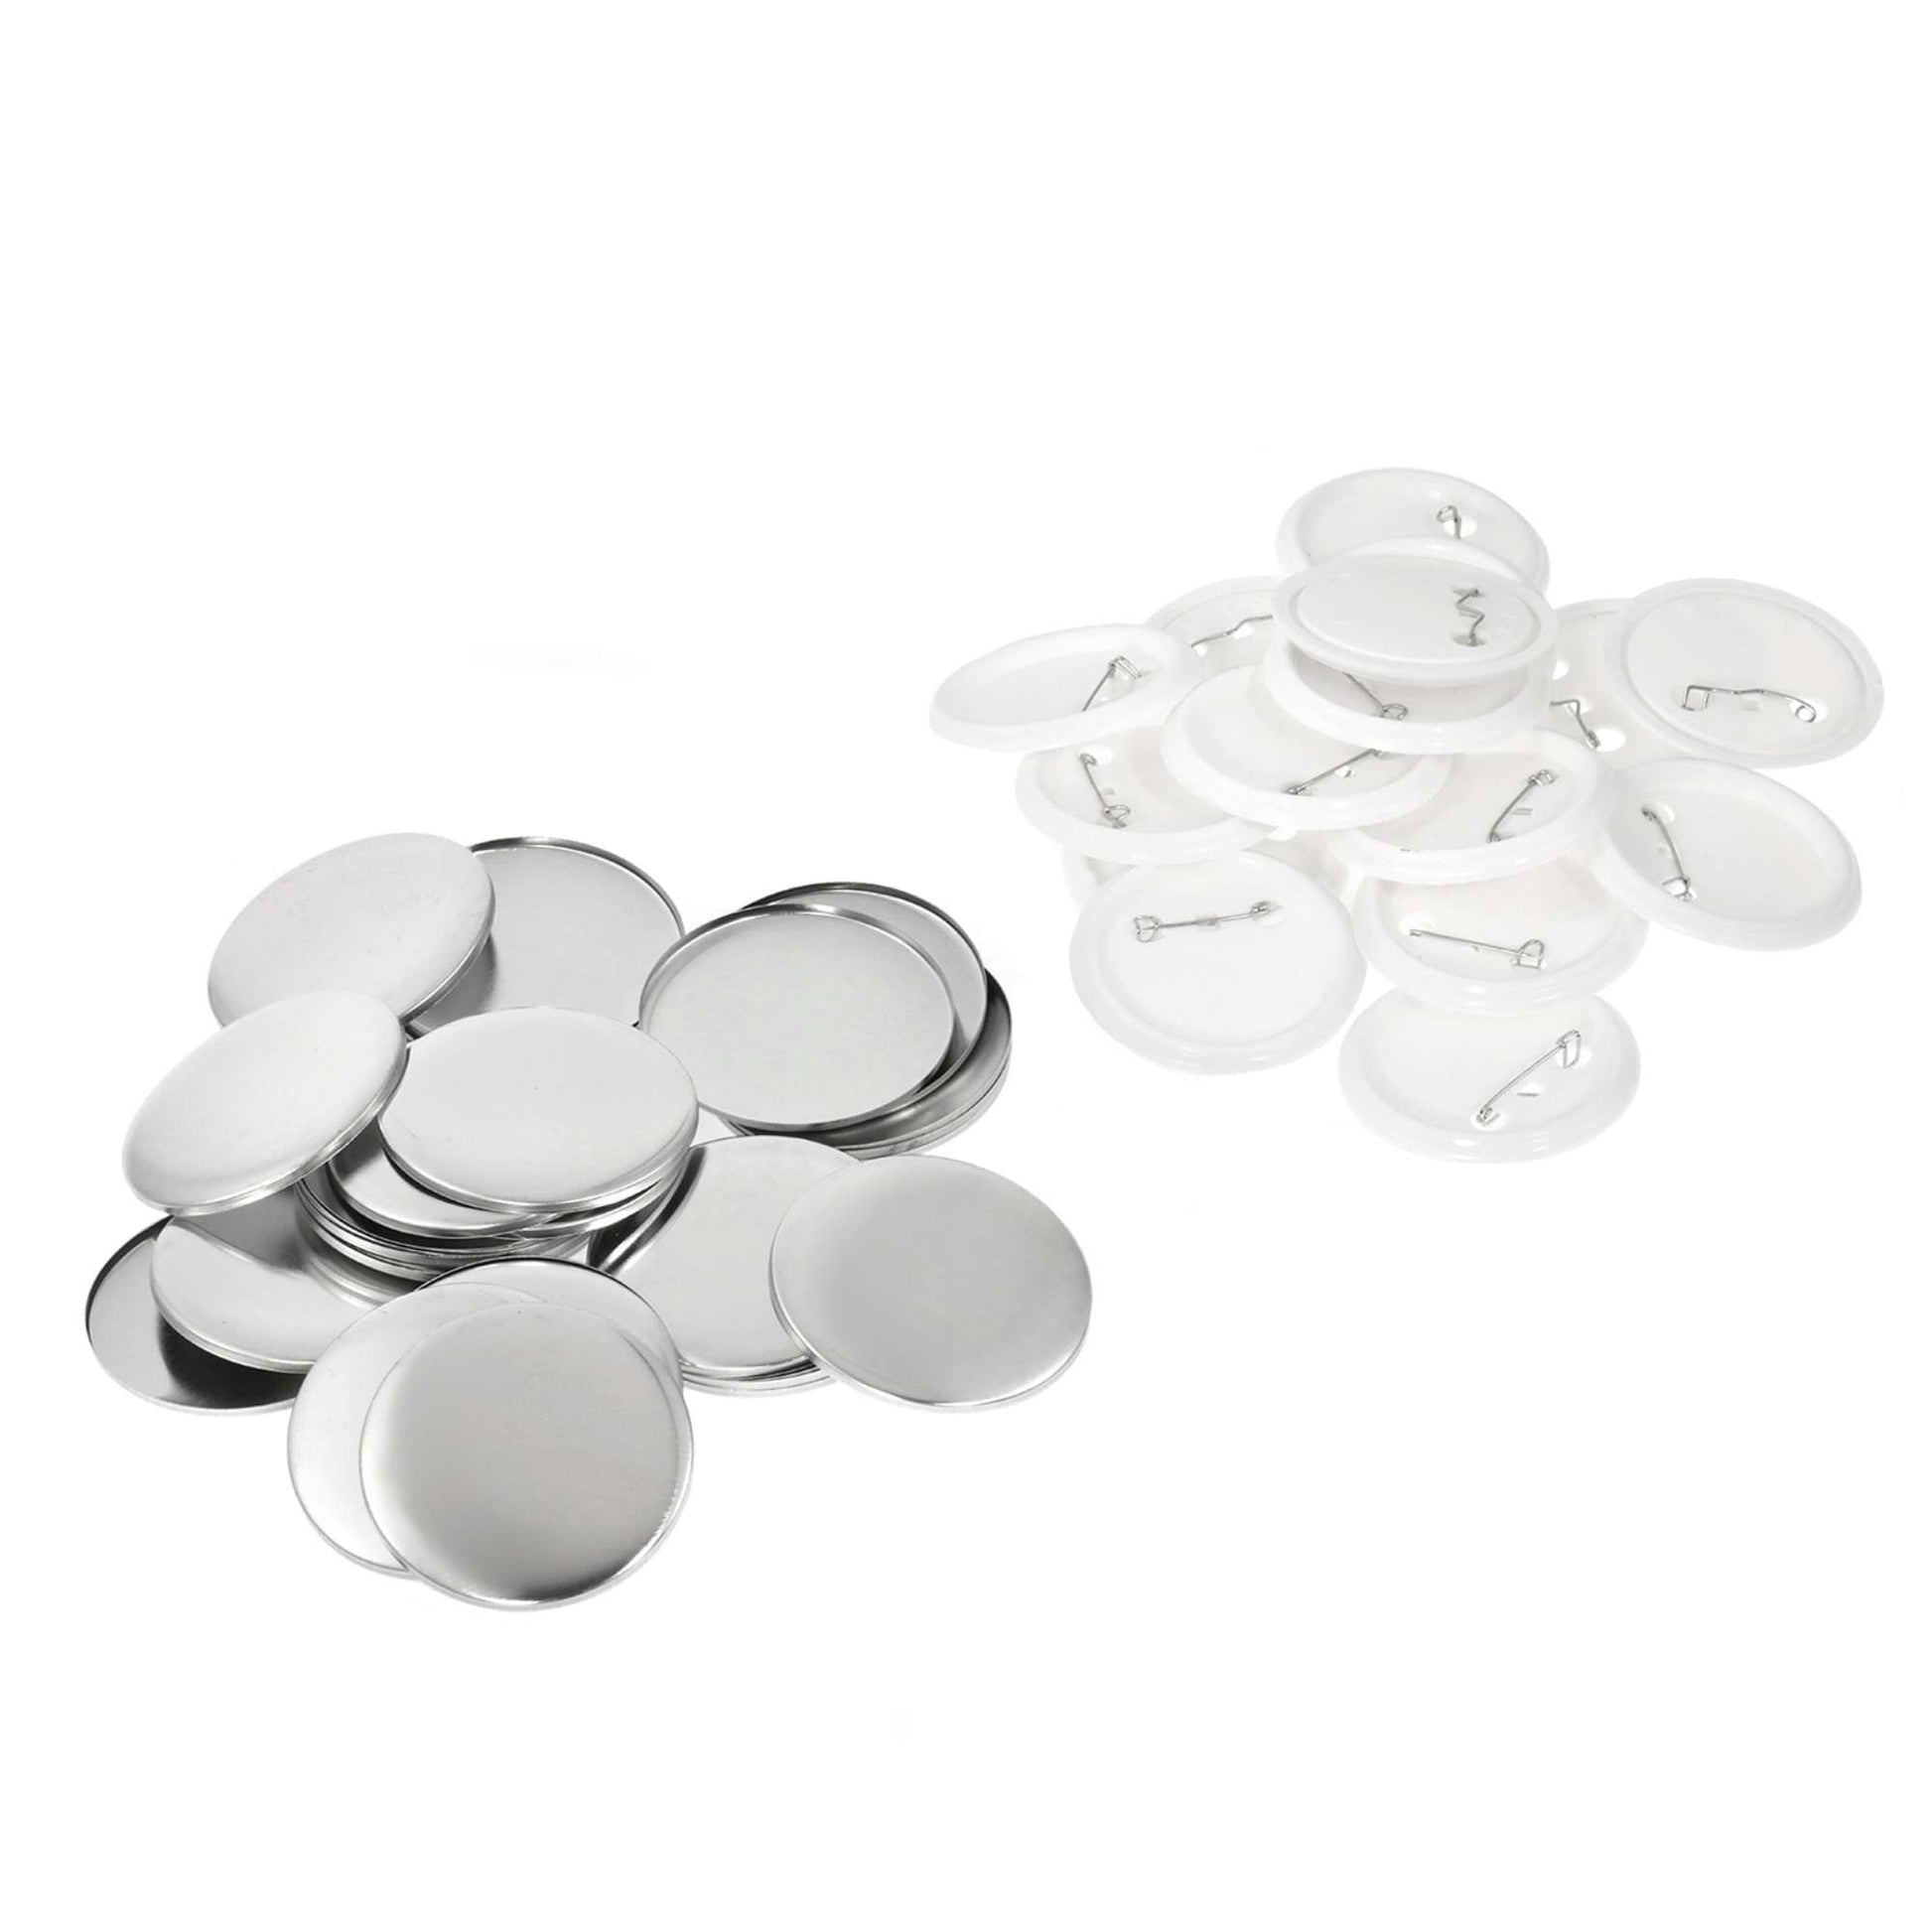 Button Badge 32mm Mould + 500x 32mm Badges - Craft DIY Hobby